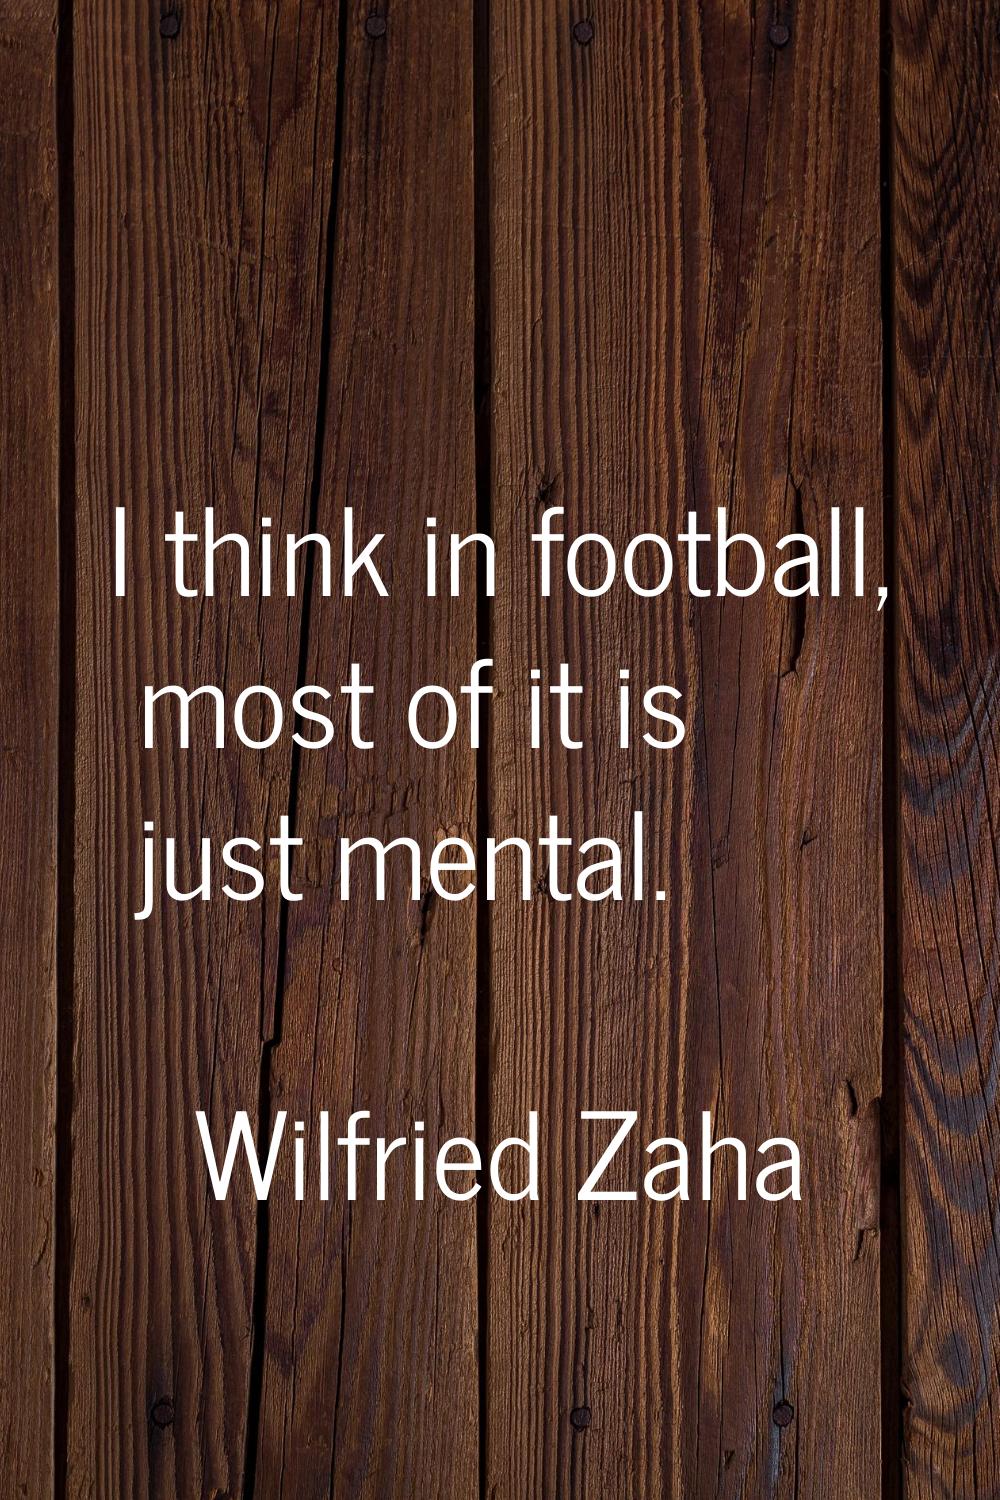 I think in football, most of it is just mental.